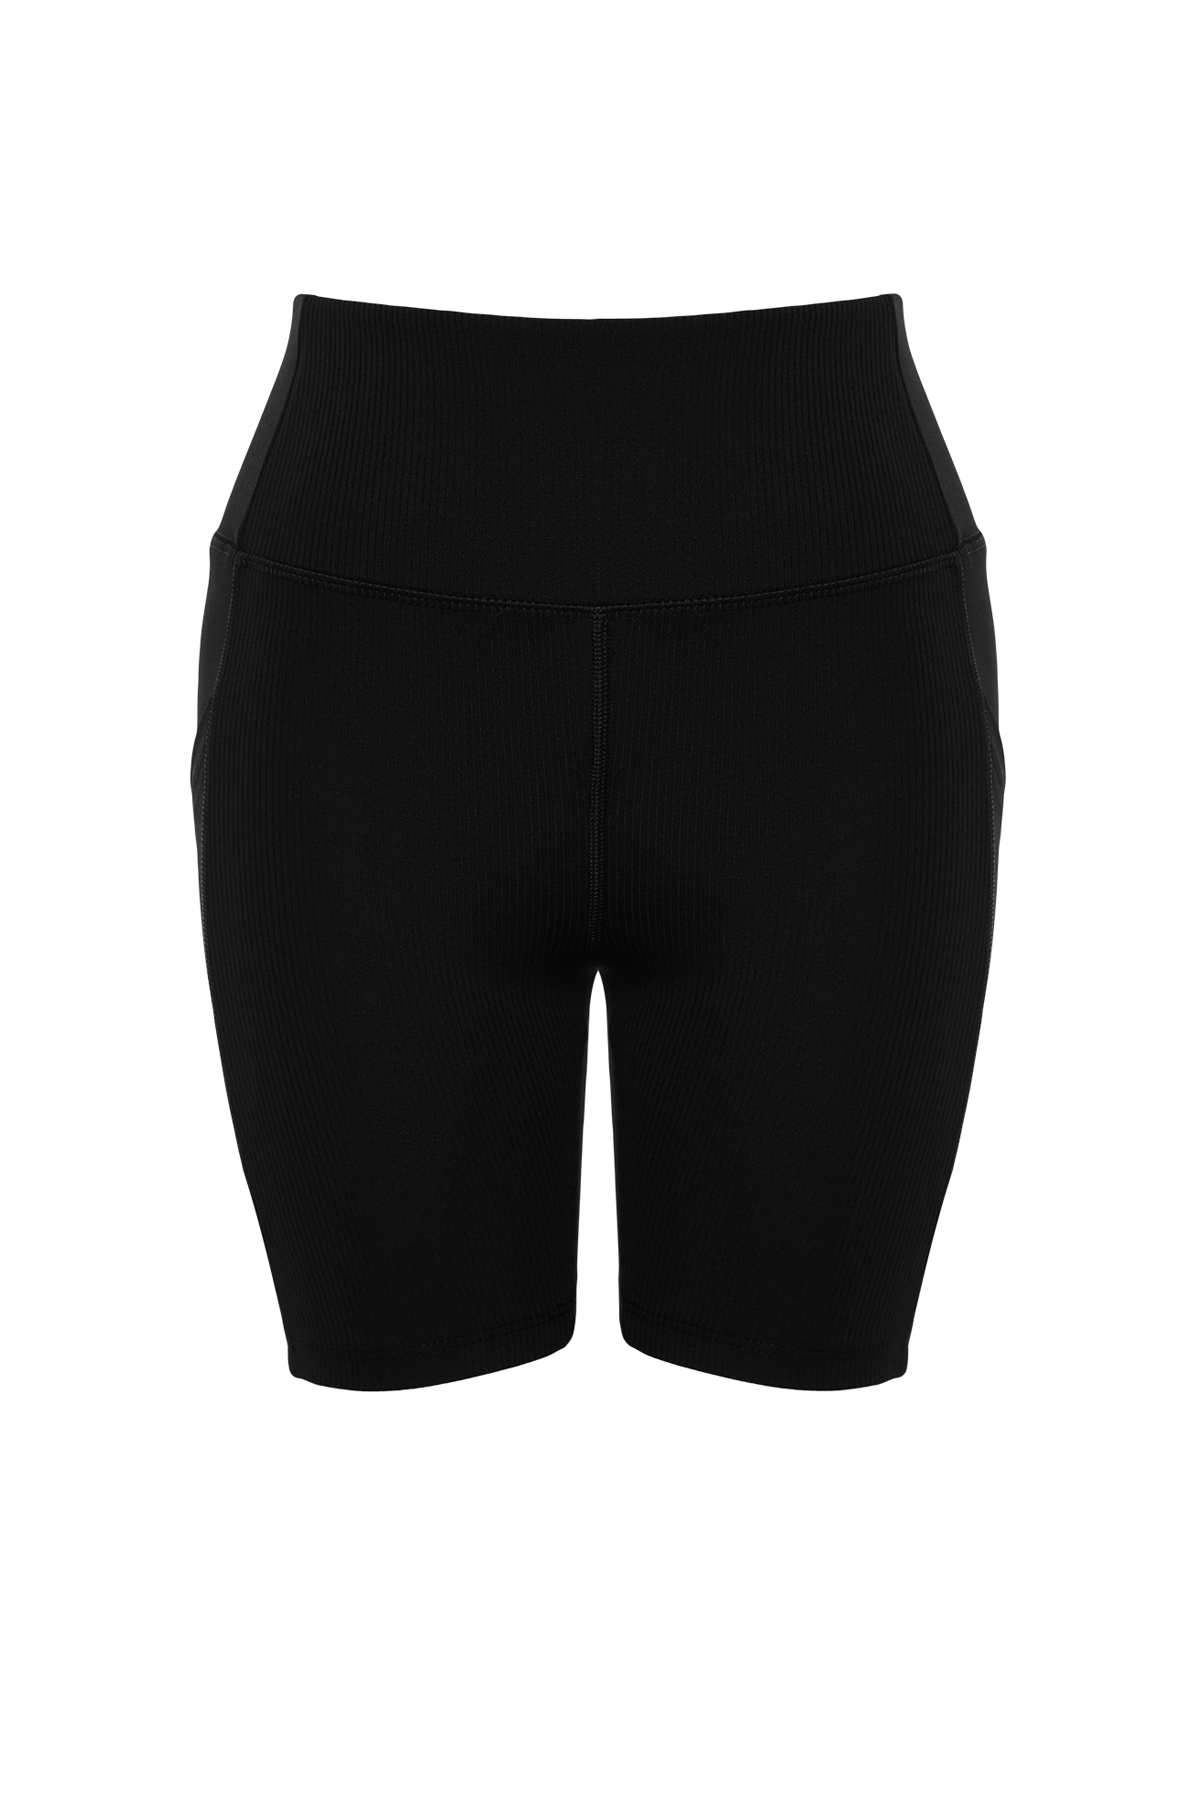 Trendyol Black Ribbed Recovery Waist Tulle Detailed Knitted Sports Shorts Leggings